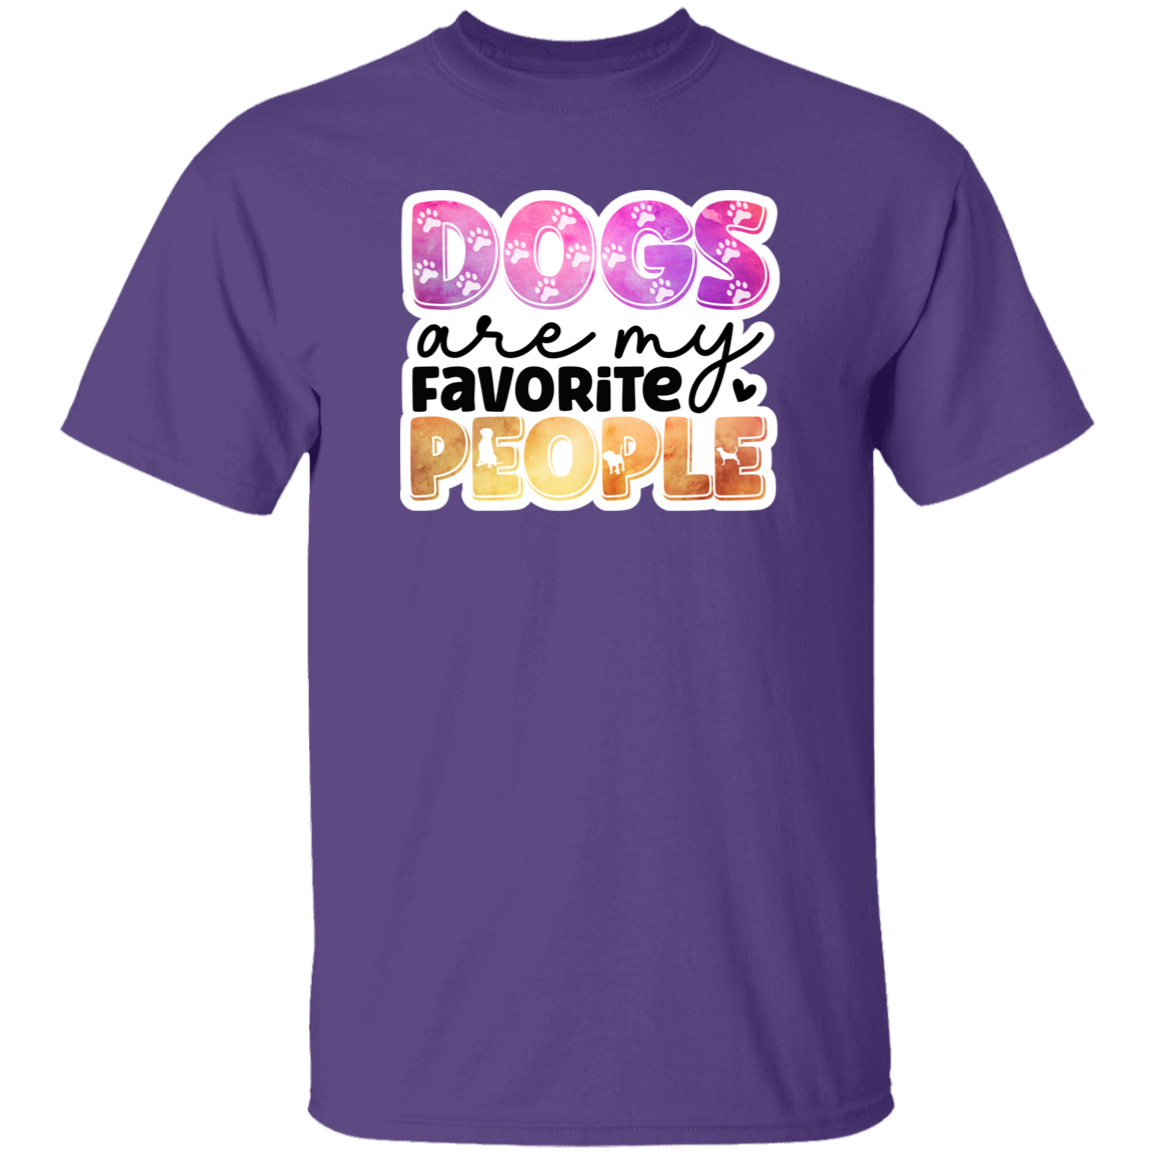 Dogs are my Favorite People Watercolor T-Shirt